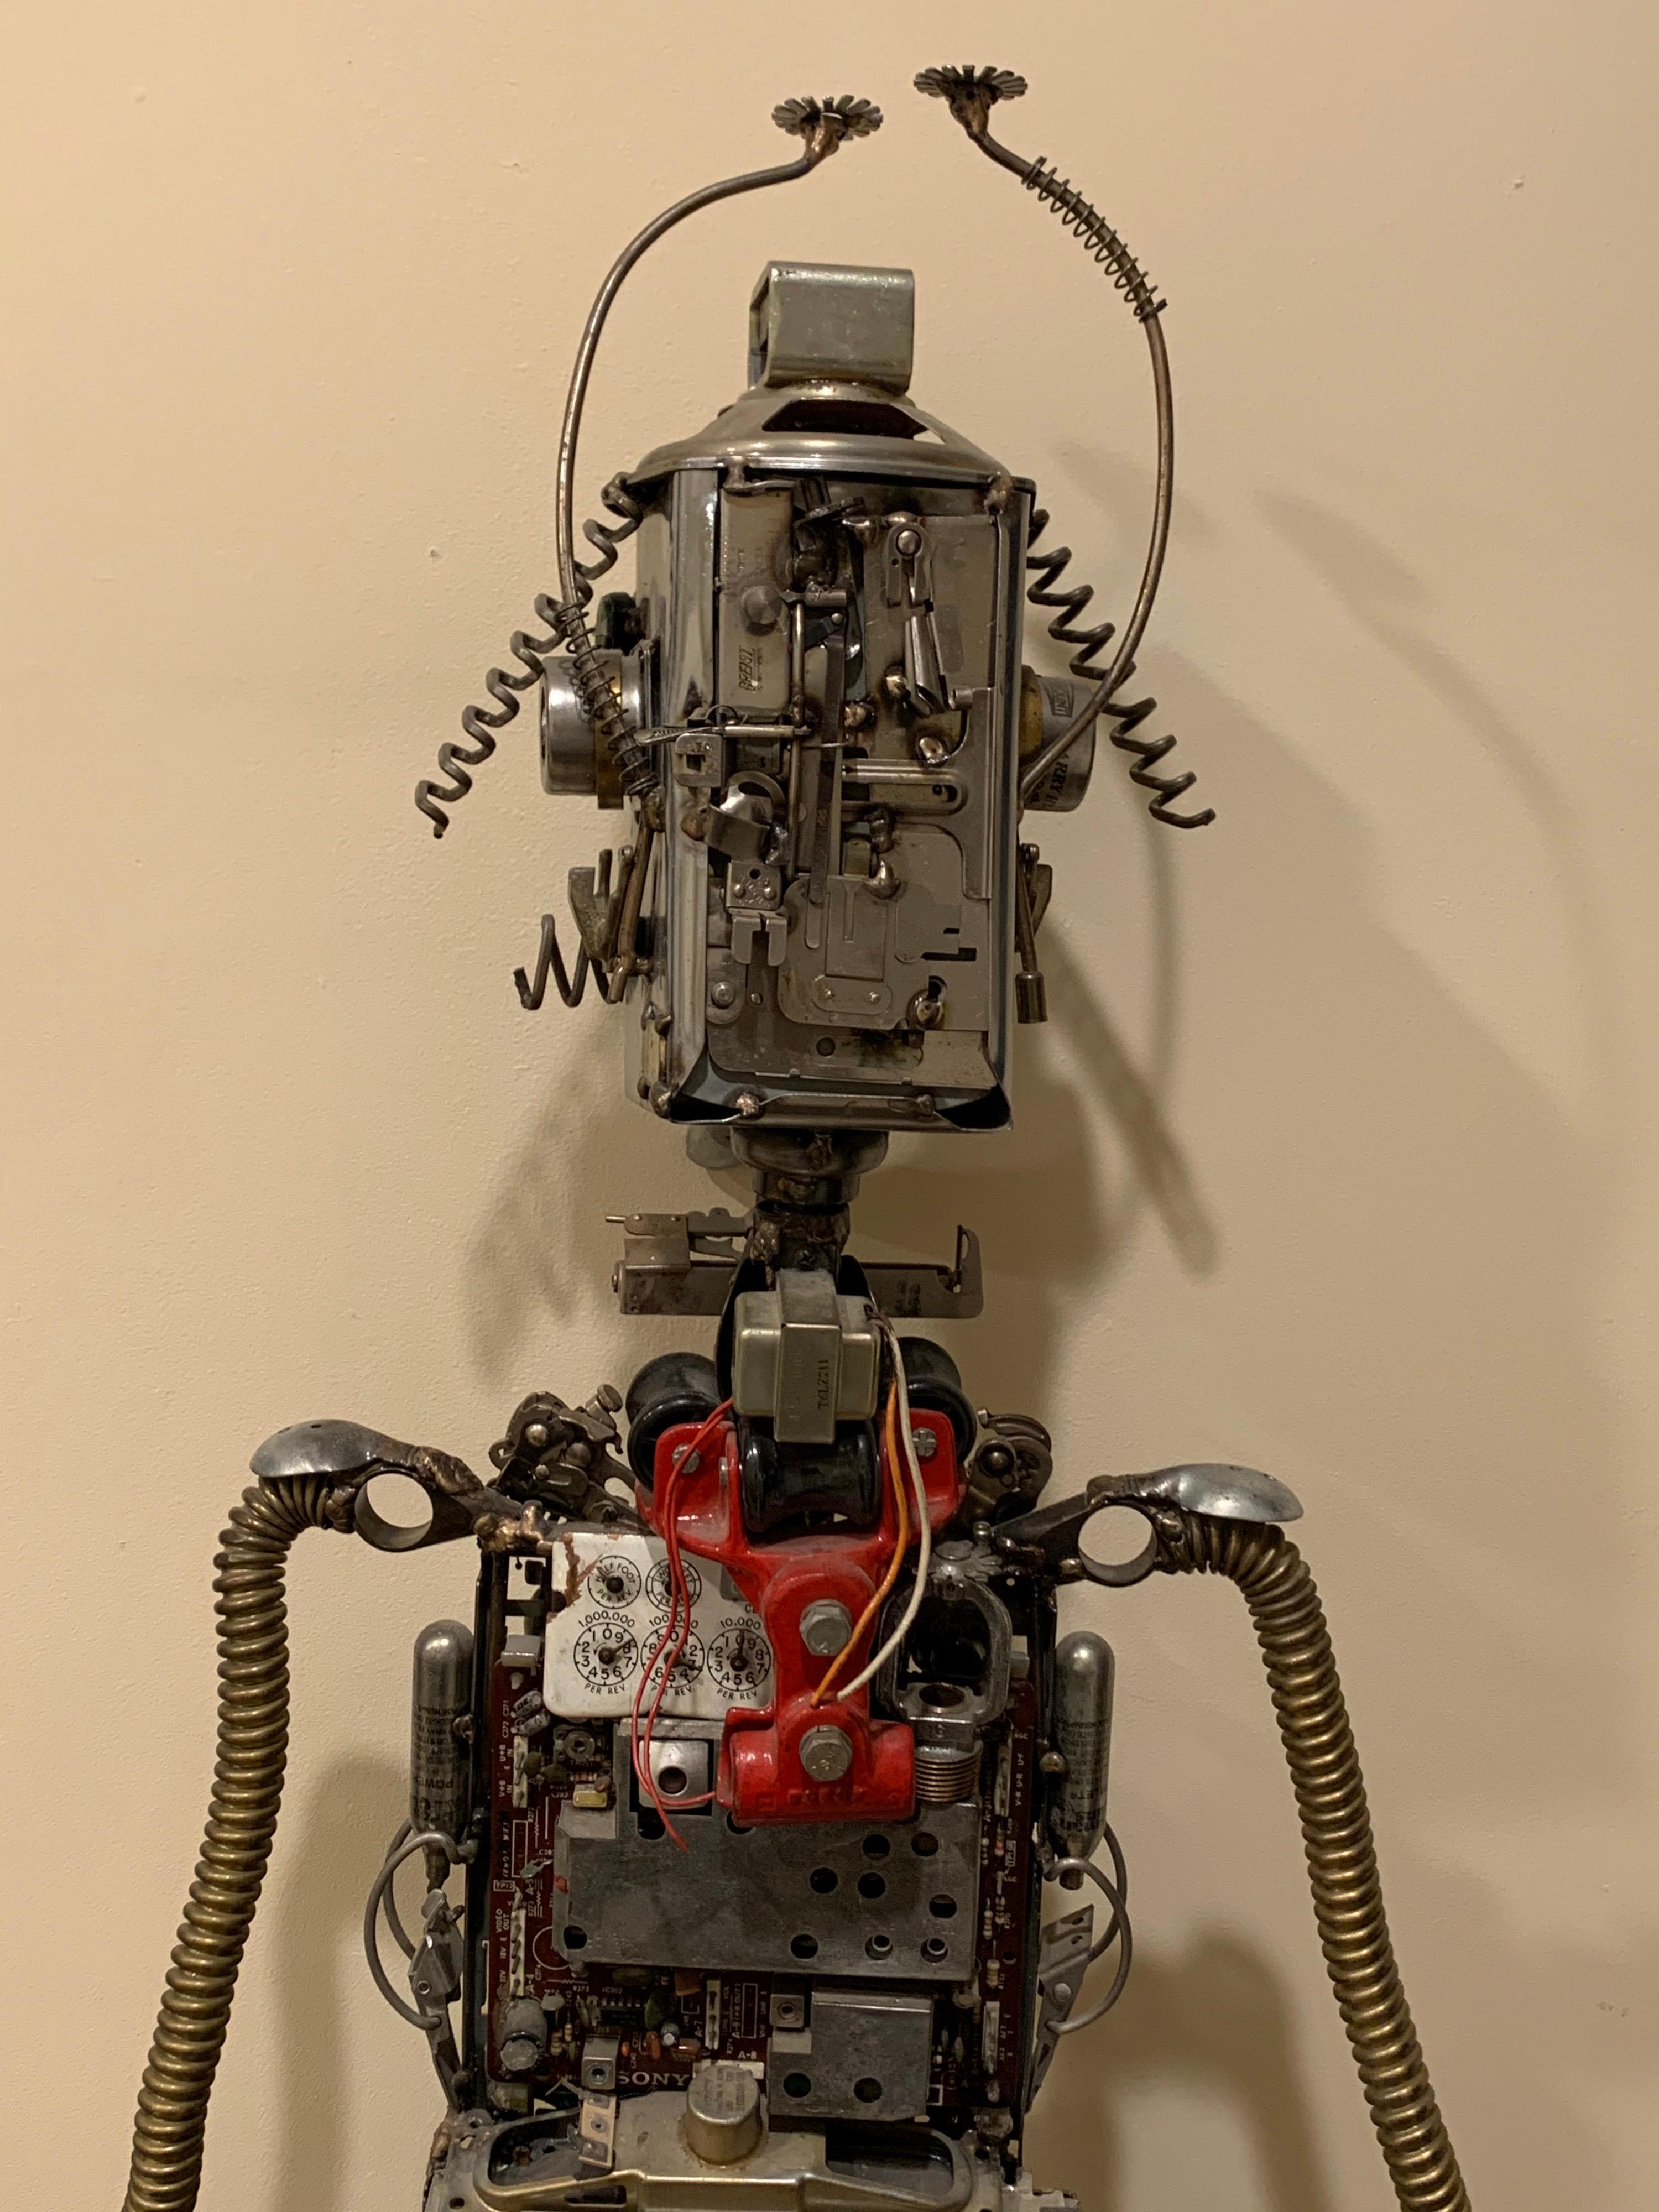 Sculpture created primarily from circuit boards with coils, tubes and plumbing fixtures.
He is quite a handsome guy!